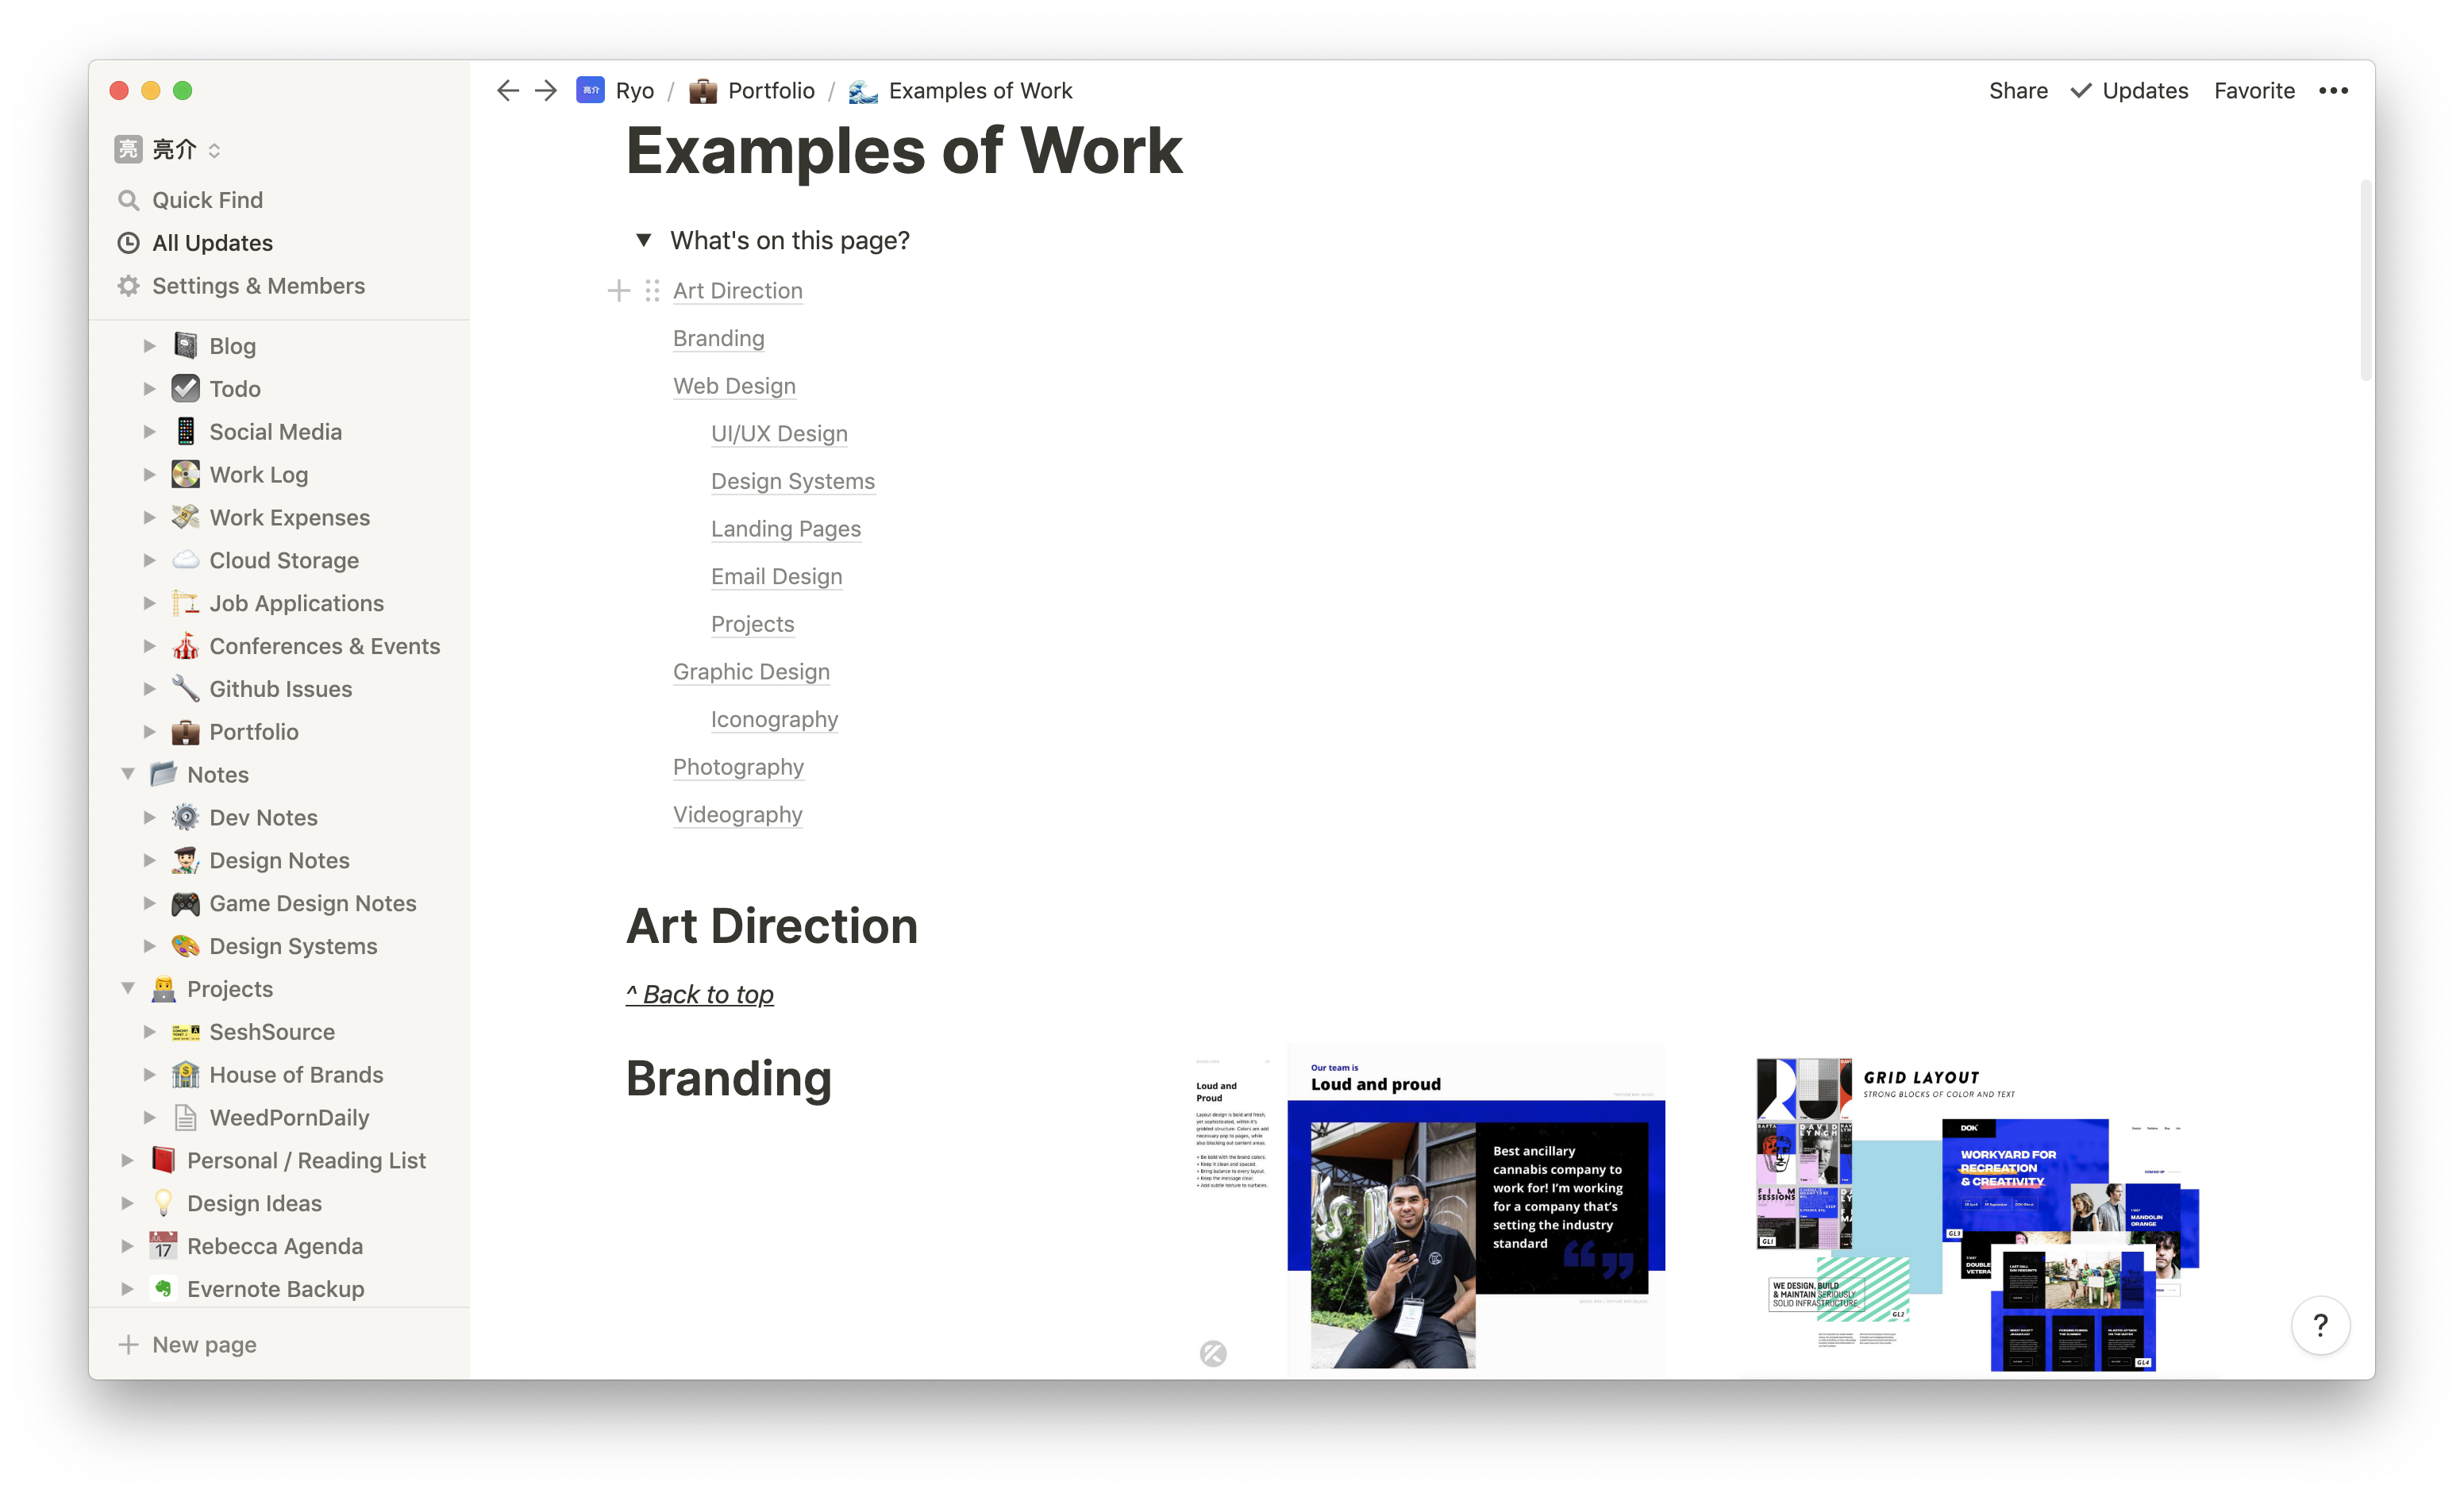 Screenshot of the Notion app on my "Examples of Work" page with a list of categories in one column and images on the right